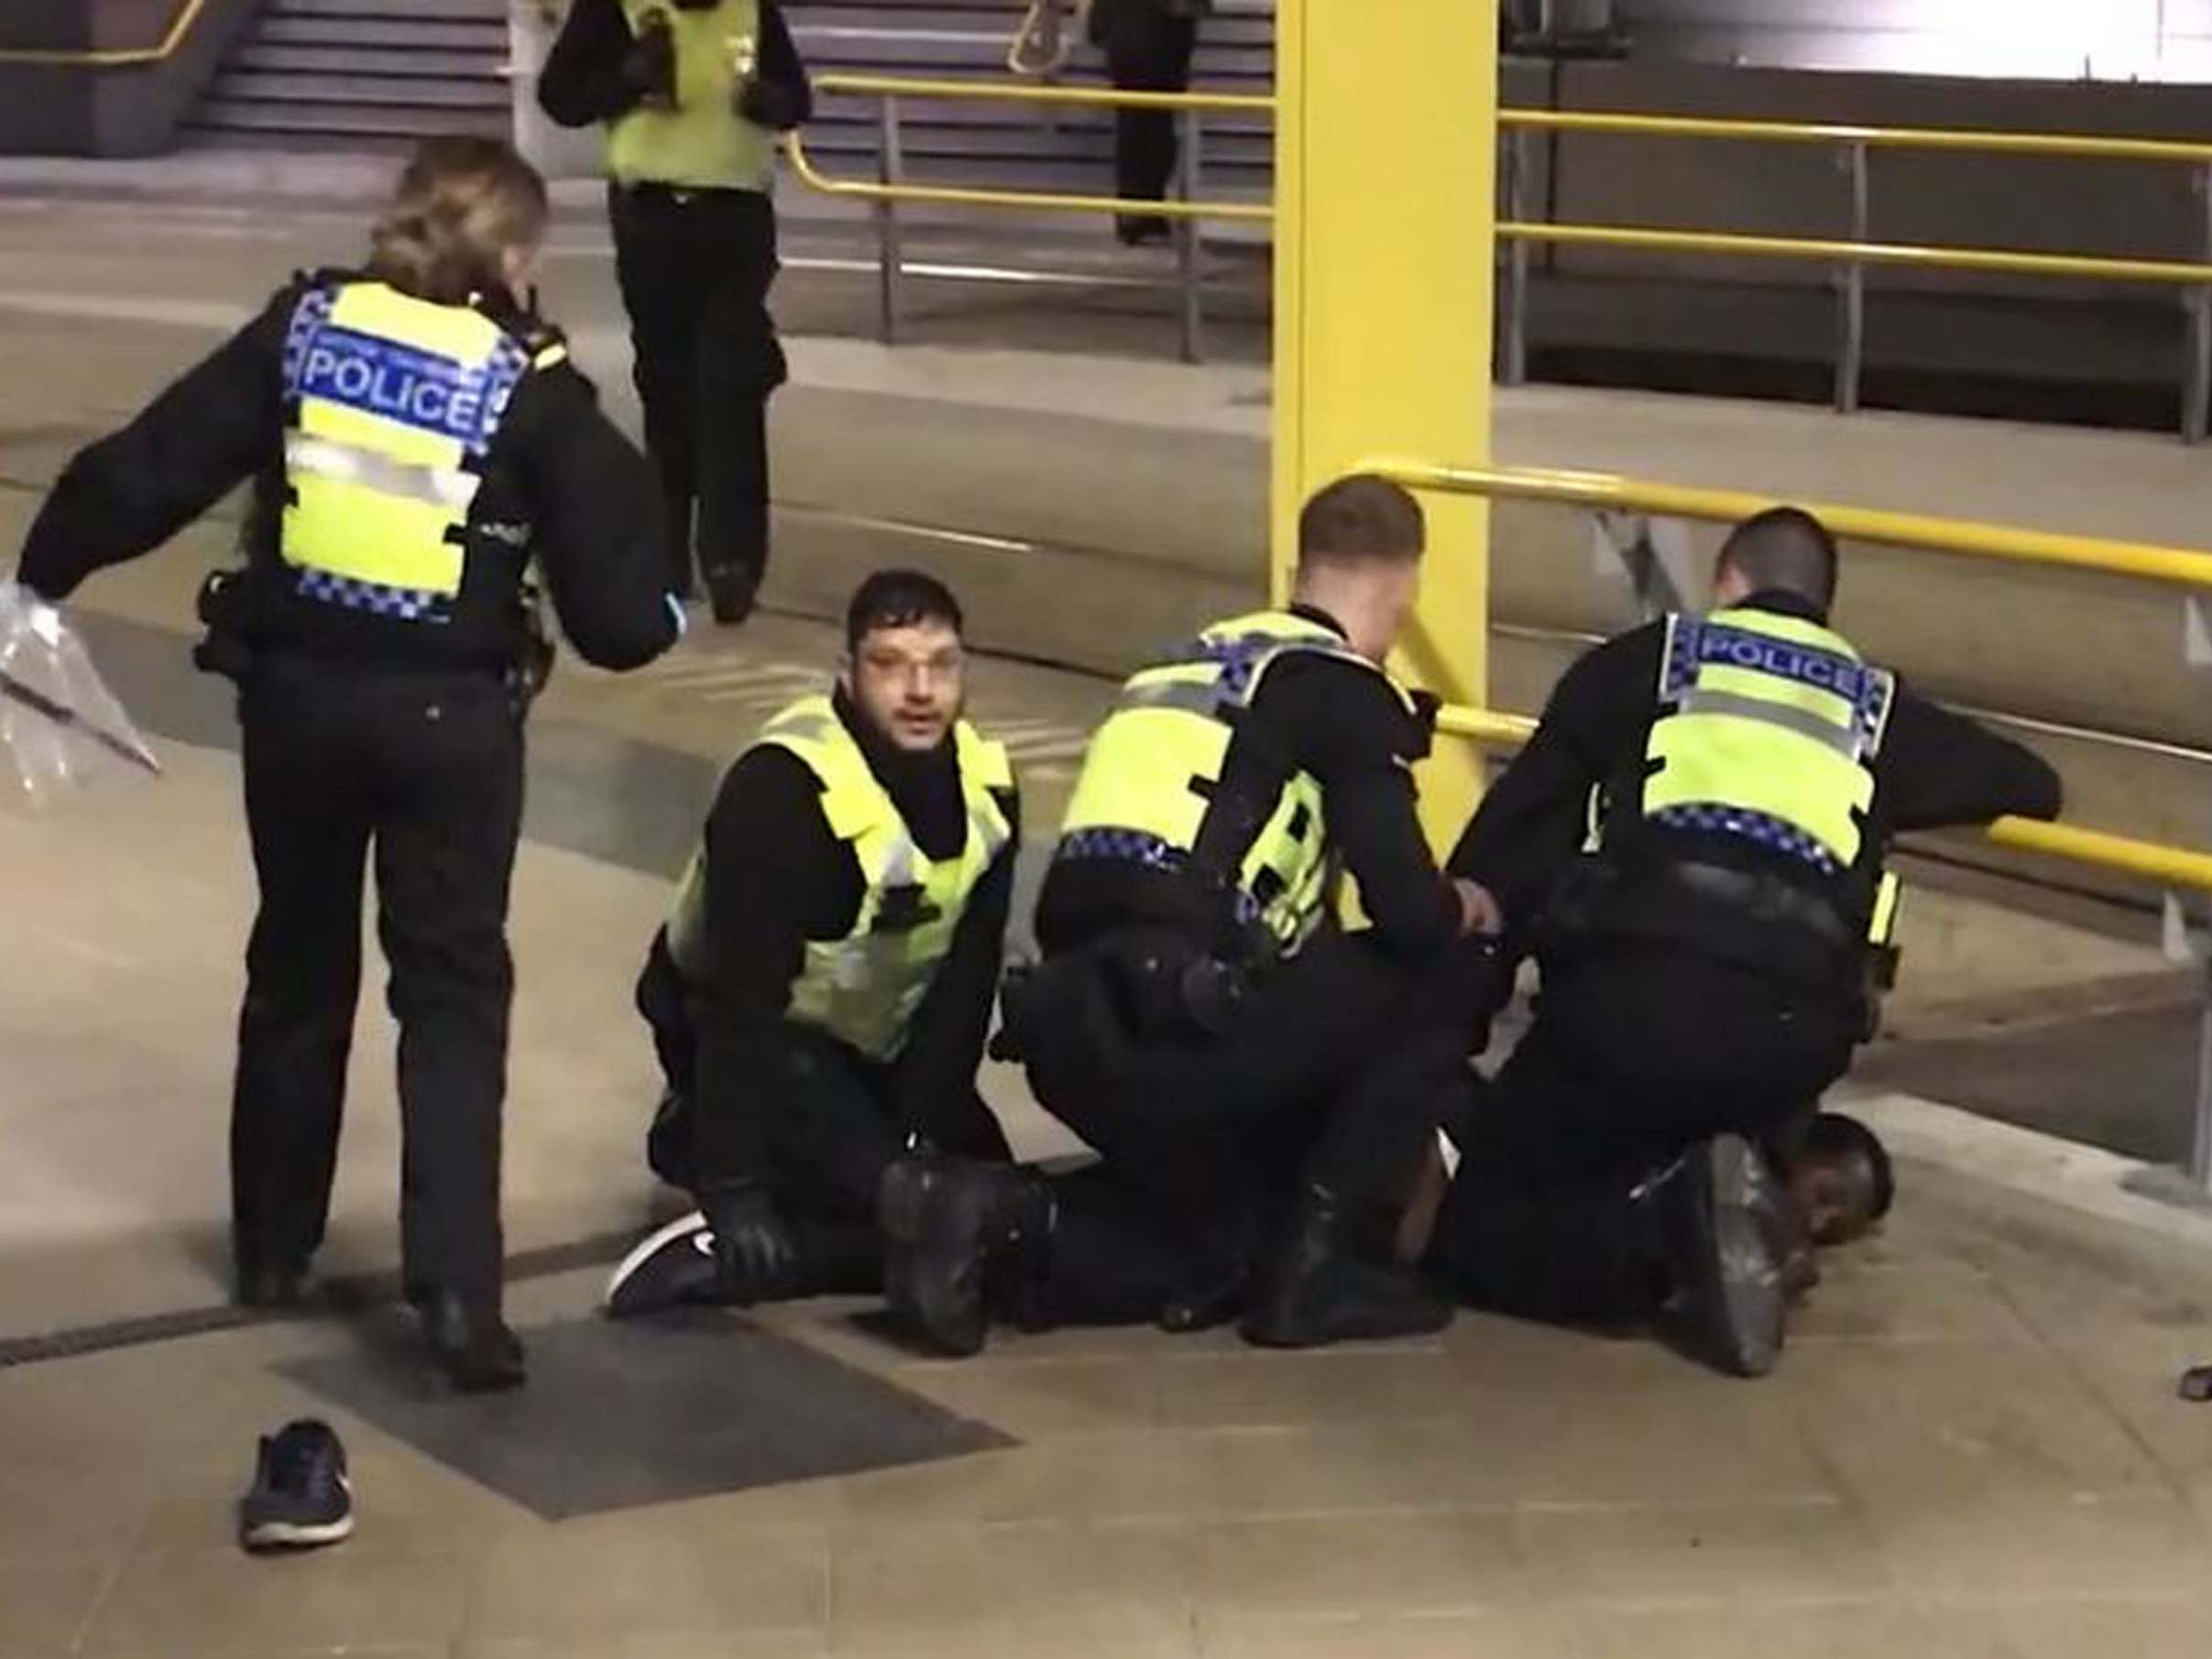 Police restraining Mahdi Mohamud after he stabbed three people at Manchester Victoria station on New Year’s Eve